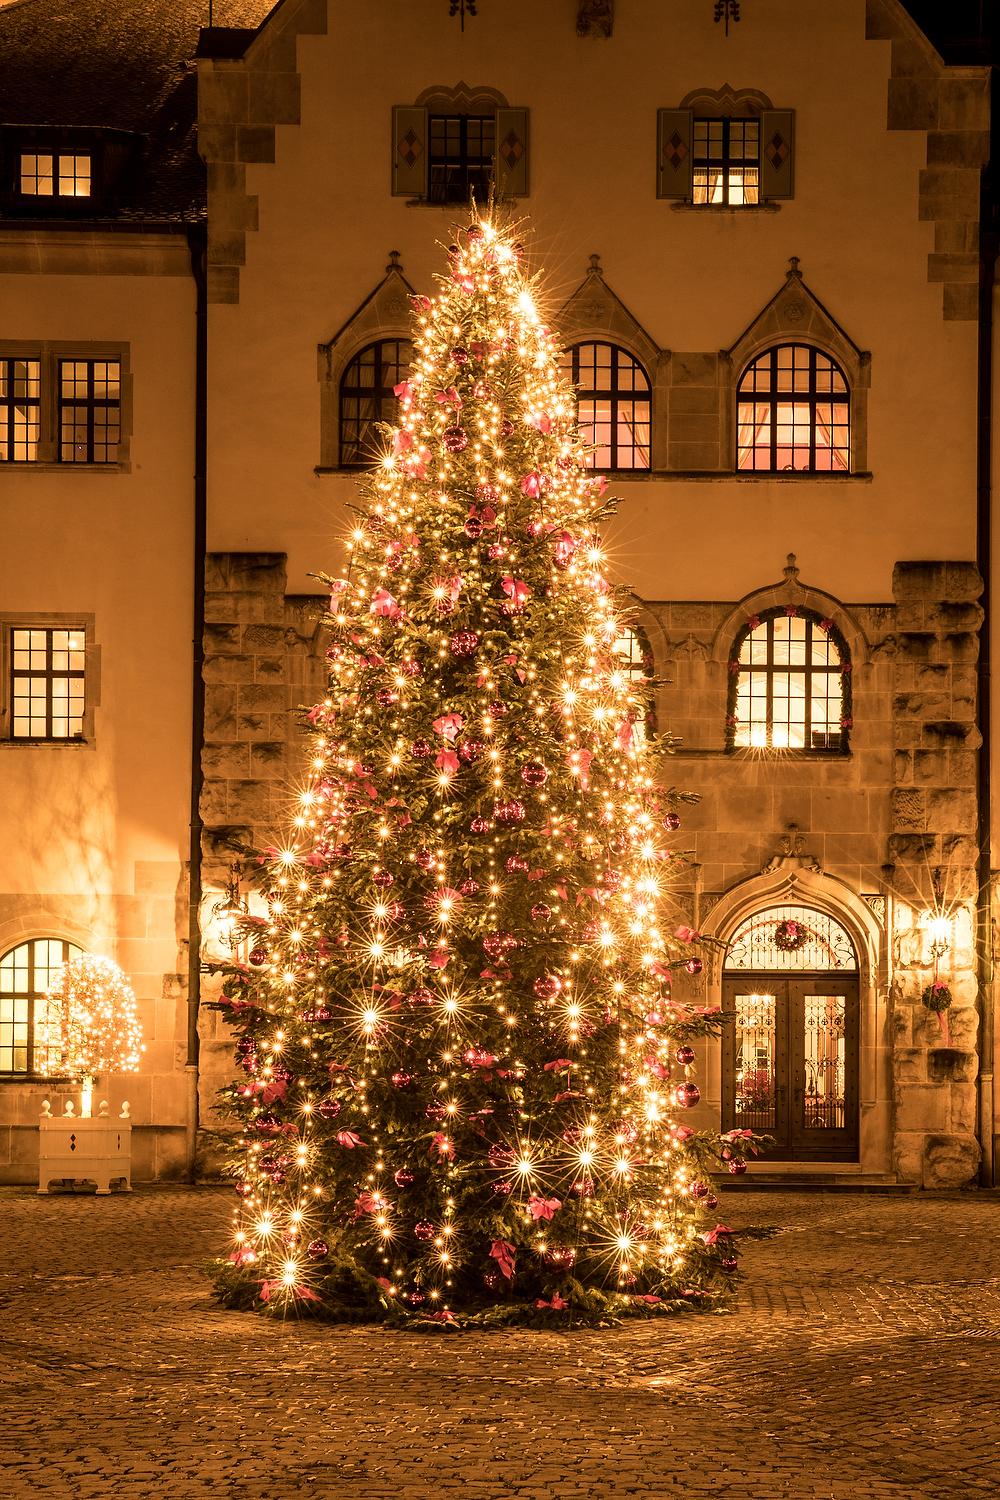 Christmas decorations at Berg Castle - December 2017